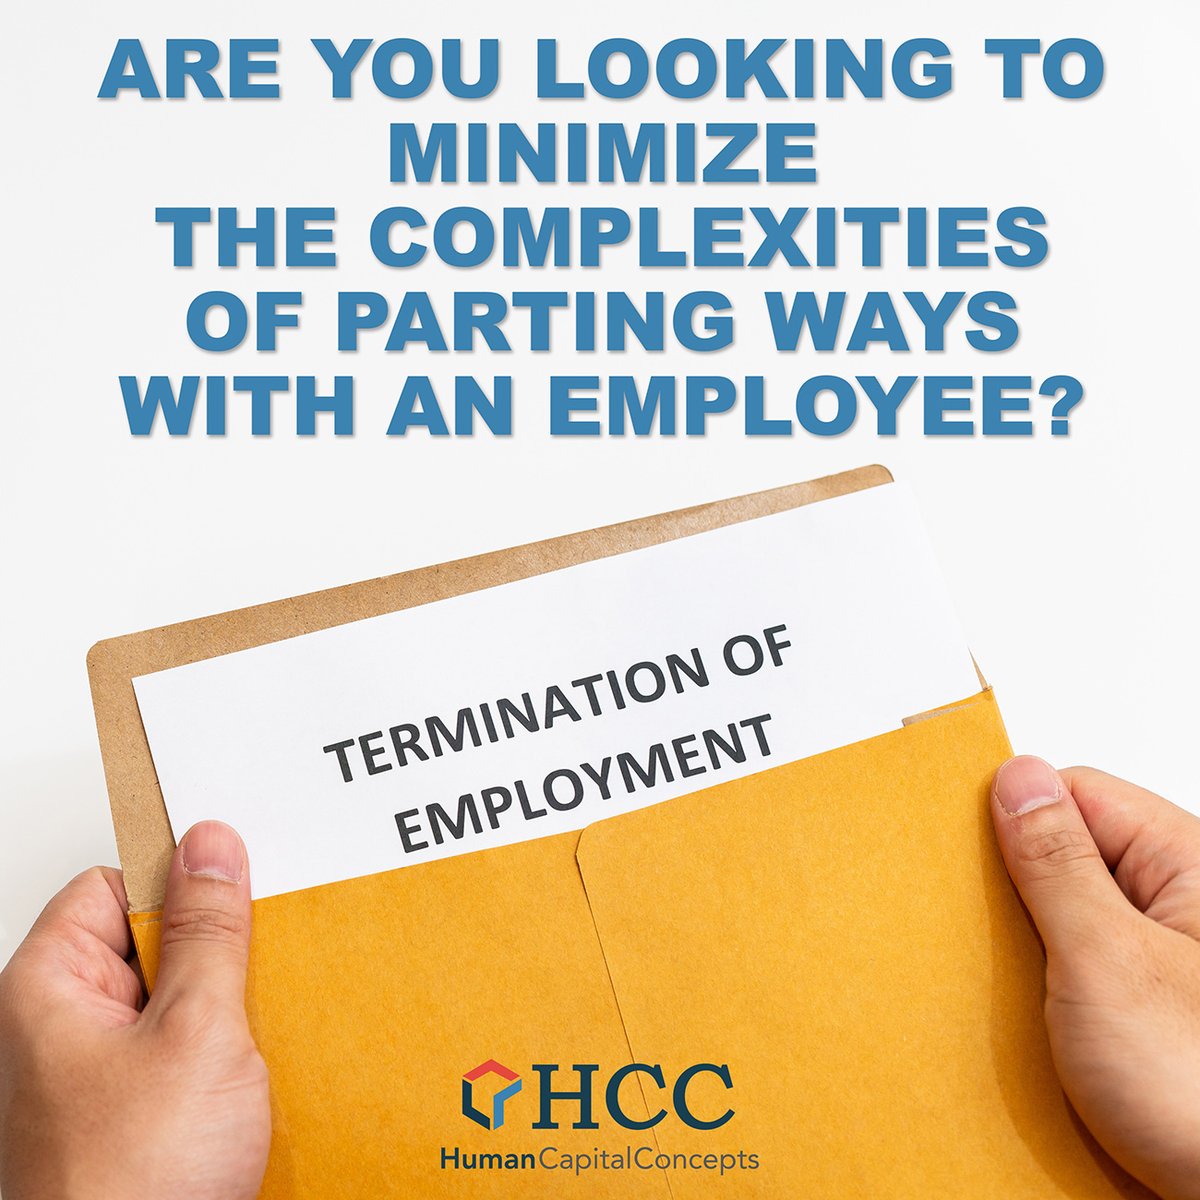 A robust termination policy isn't just a precaution; it's a blueprint for fairness and legal compliance in the challenging arena of employee separations. #PEO #HCC #HRSolutions #HRManagement #HRConsulting #Leadership #TerminationPolicies businessnewsdaily.com/15998-terminat…